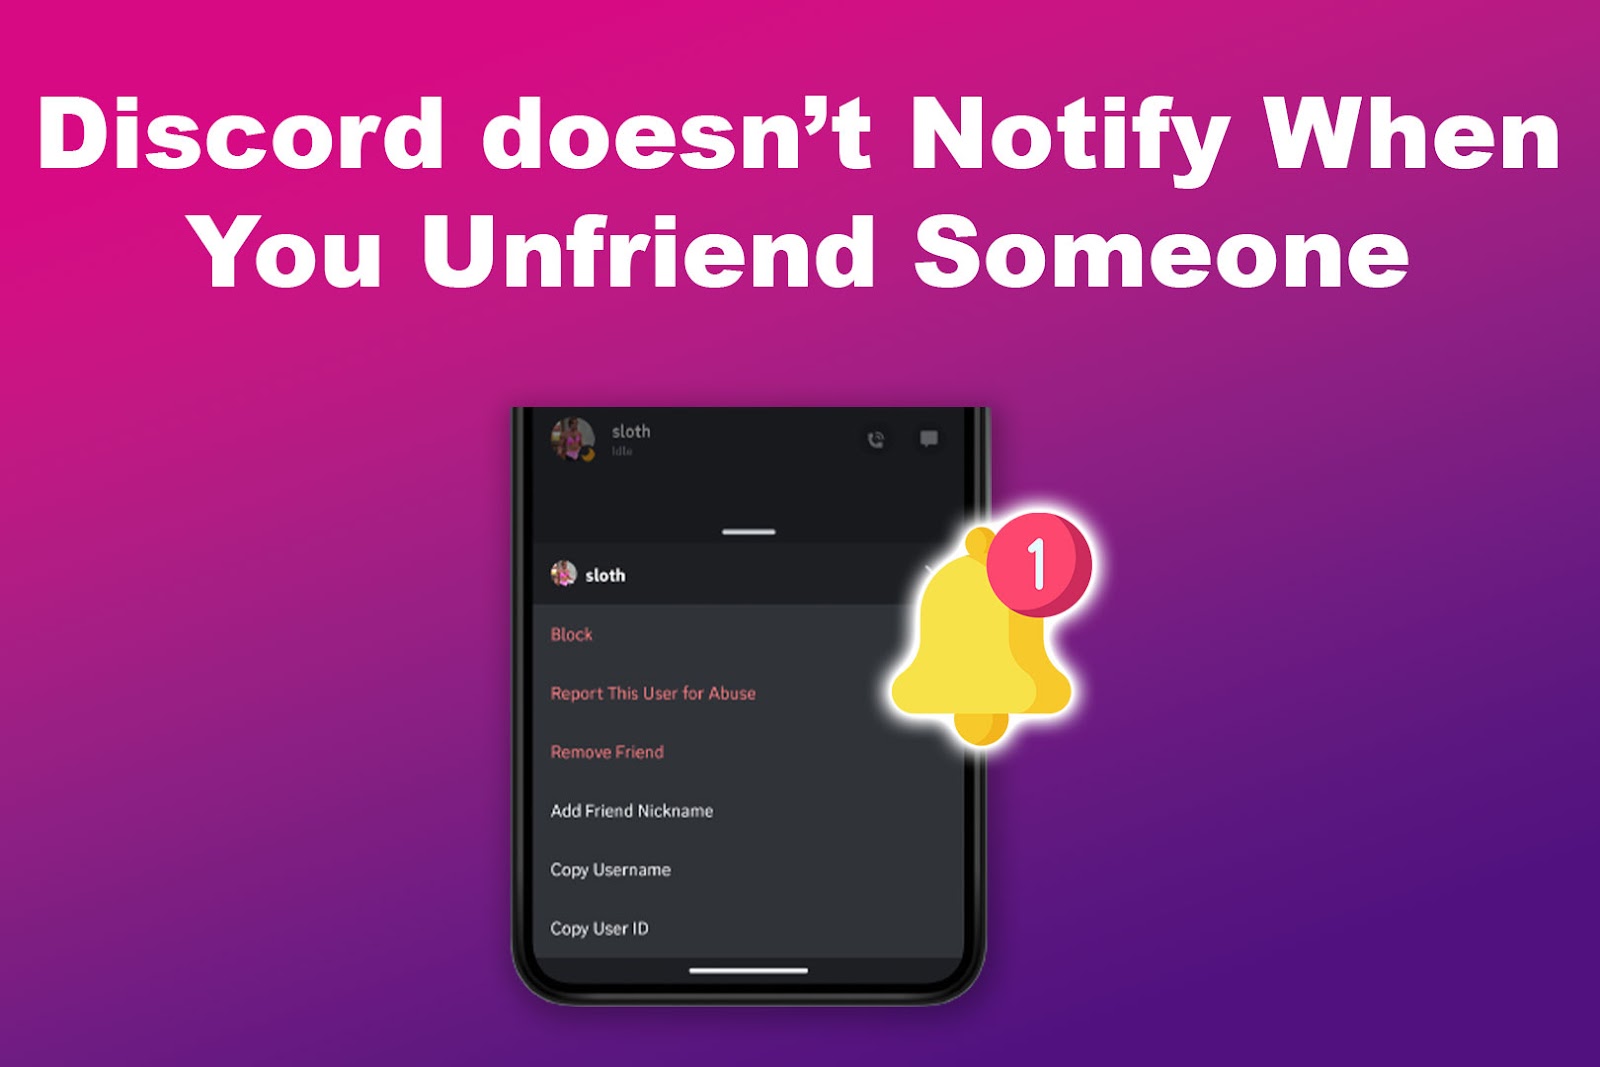 Does Discord Notify When You Unfriend Someone